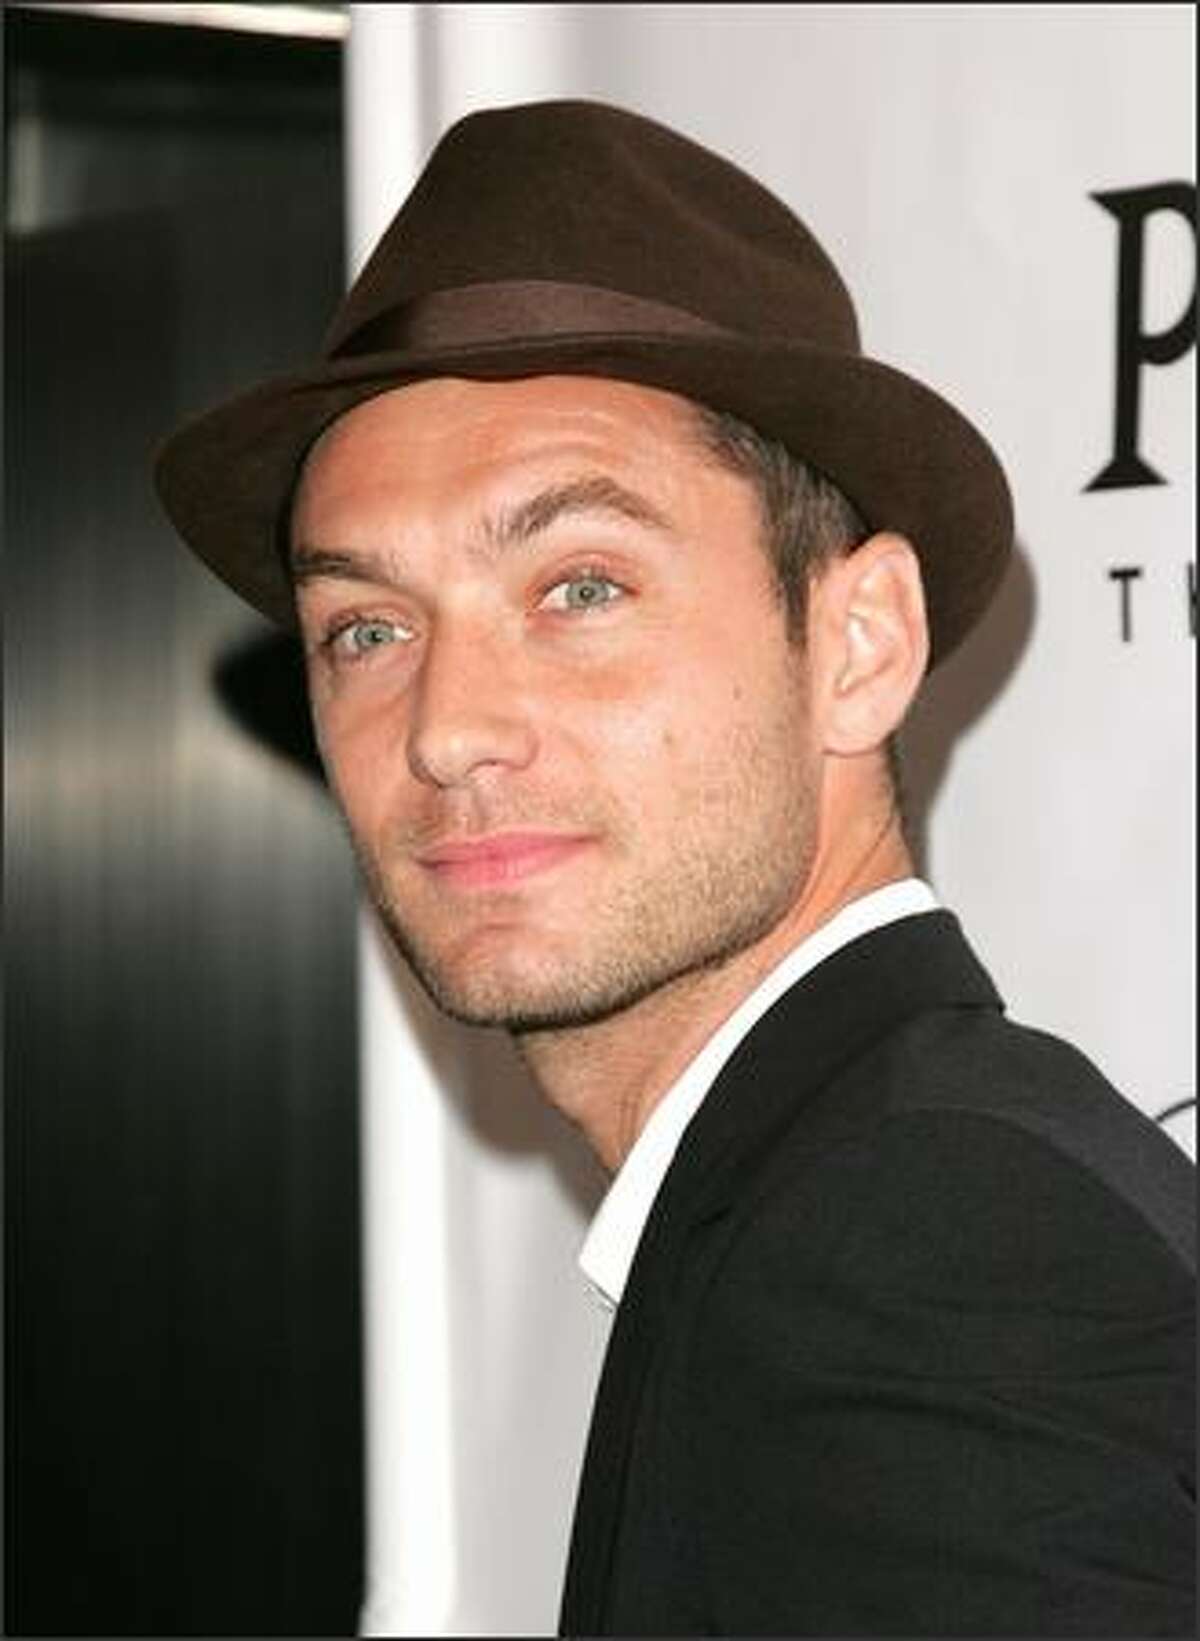 Actor Jude Law attends Sony Pictures Classics' Premiere Of "Sleuth" at the Paris Theatre on October 2, 2007 in New York City.